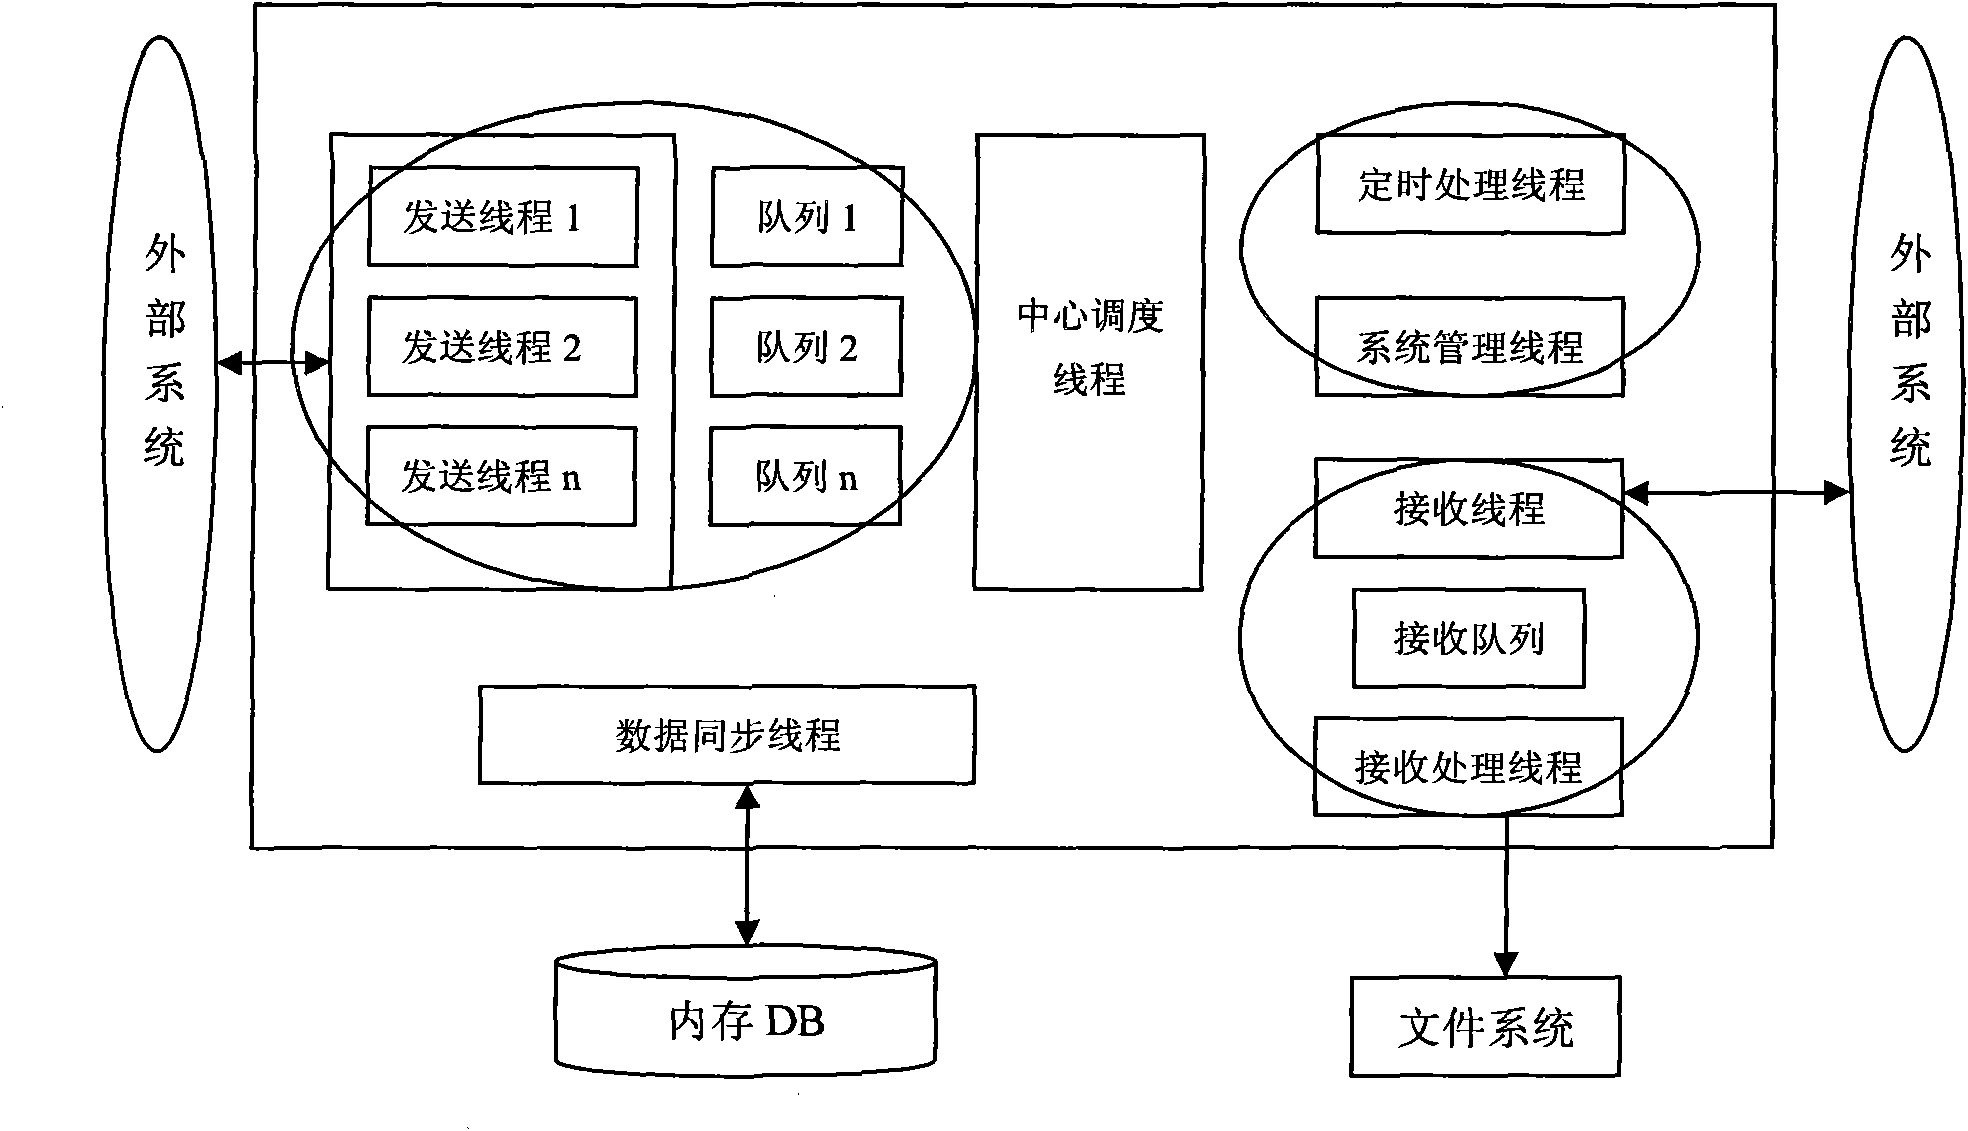 Flow control method based on cross operator SMS application